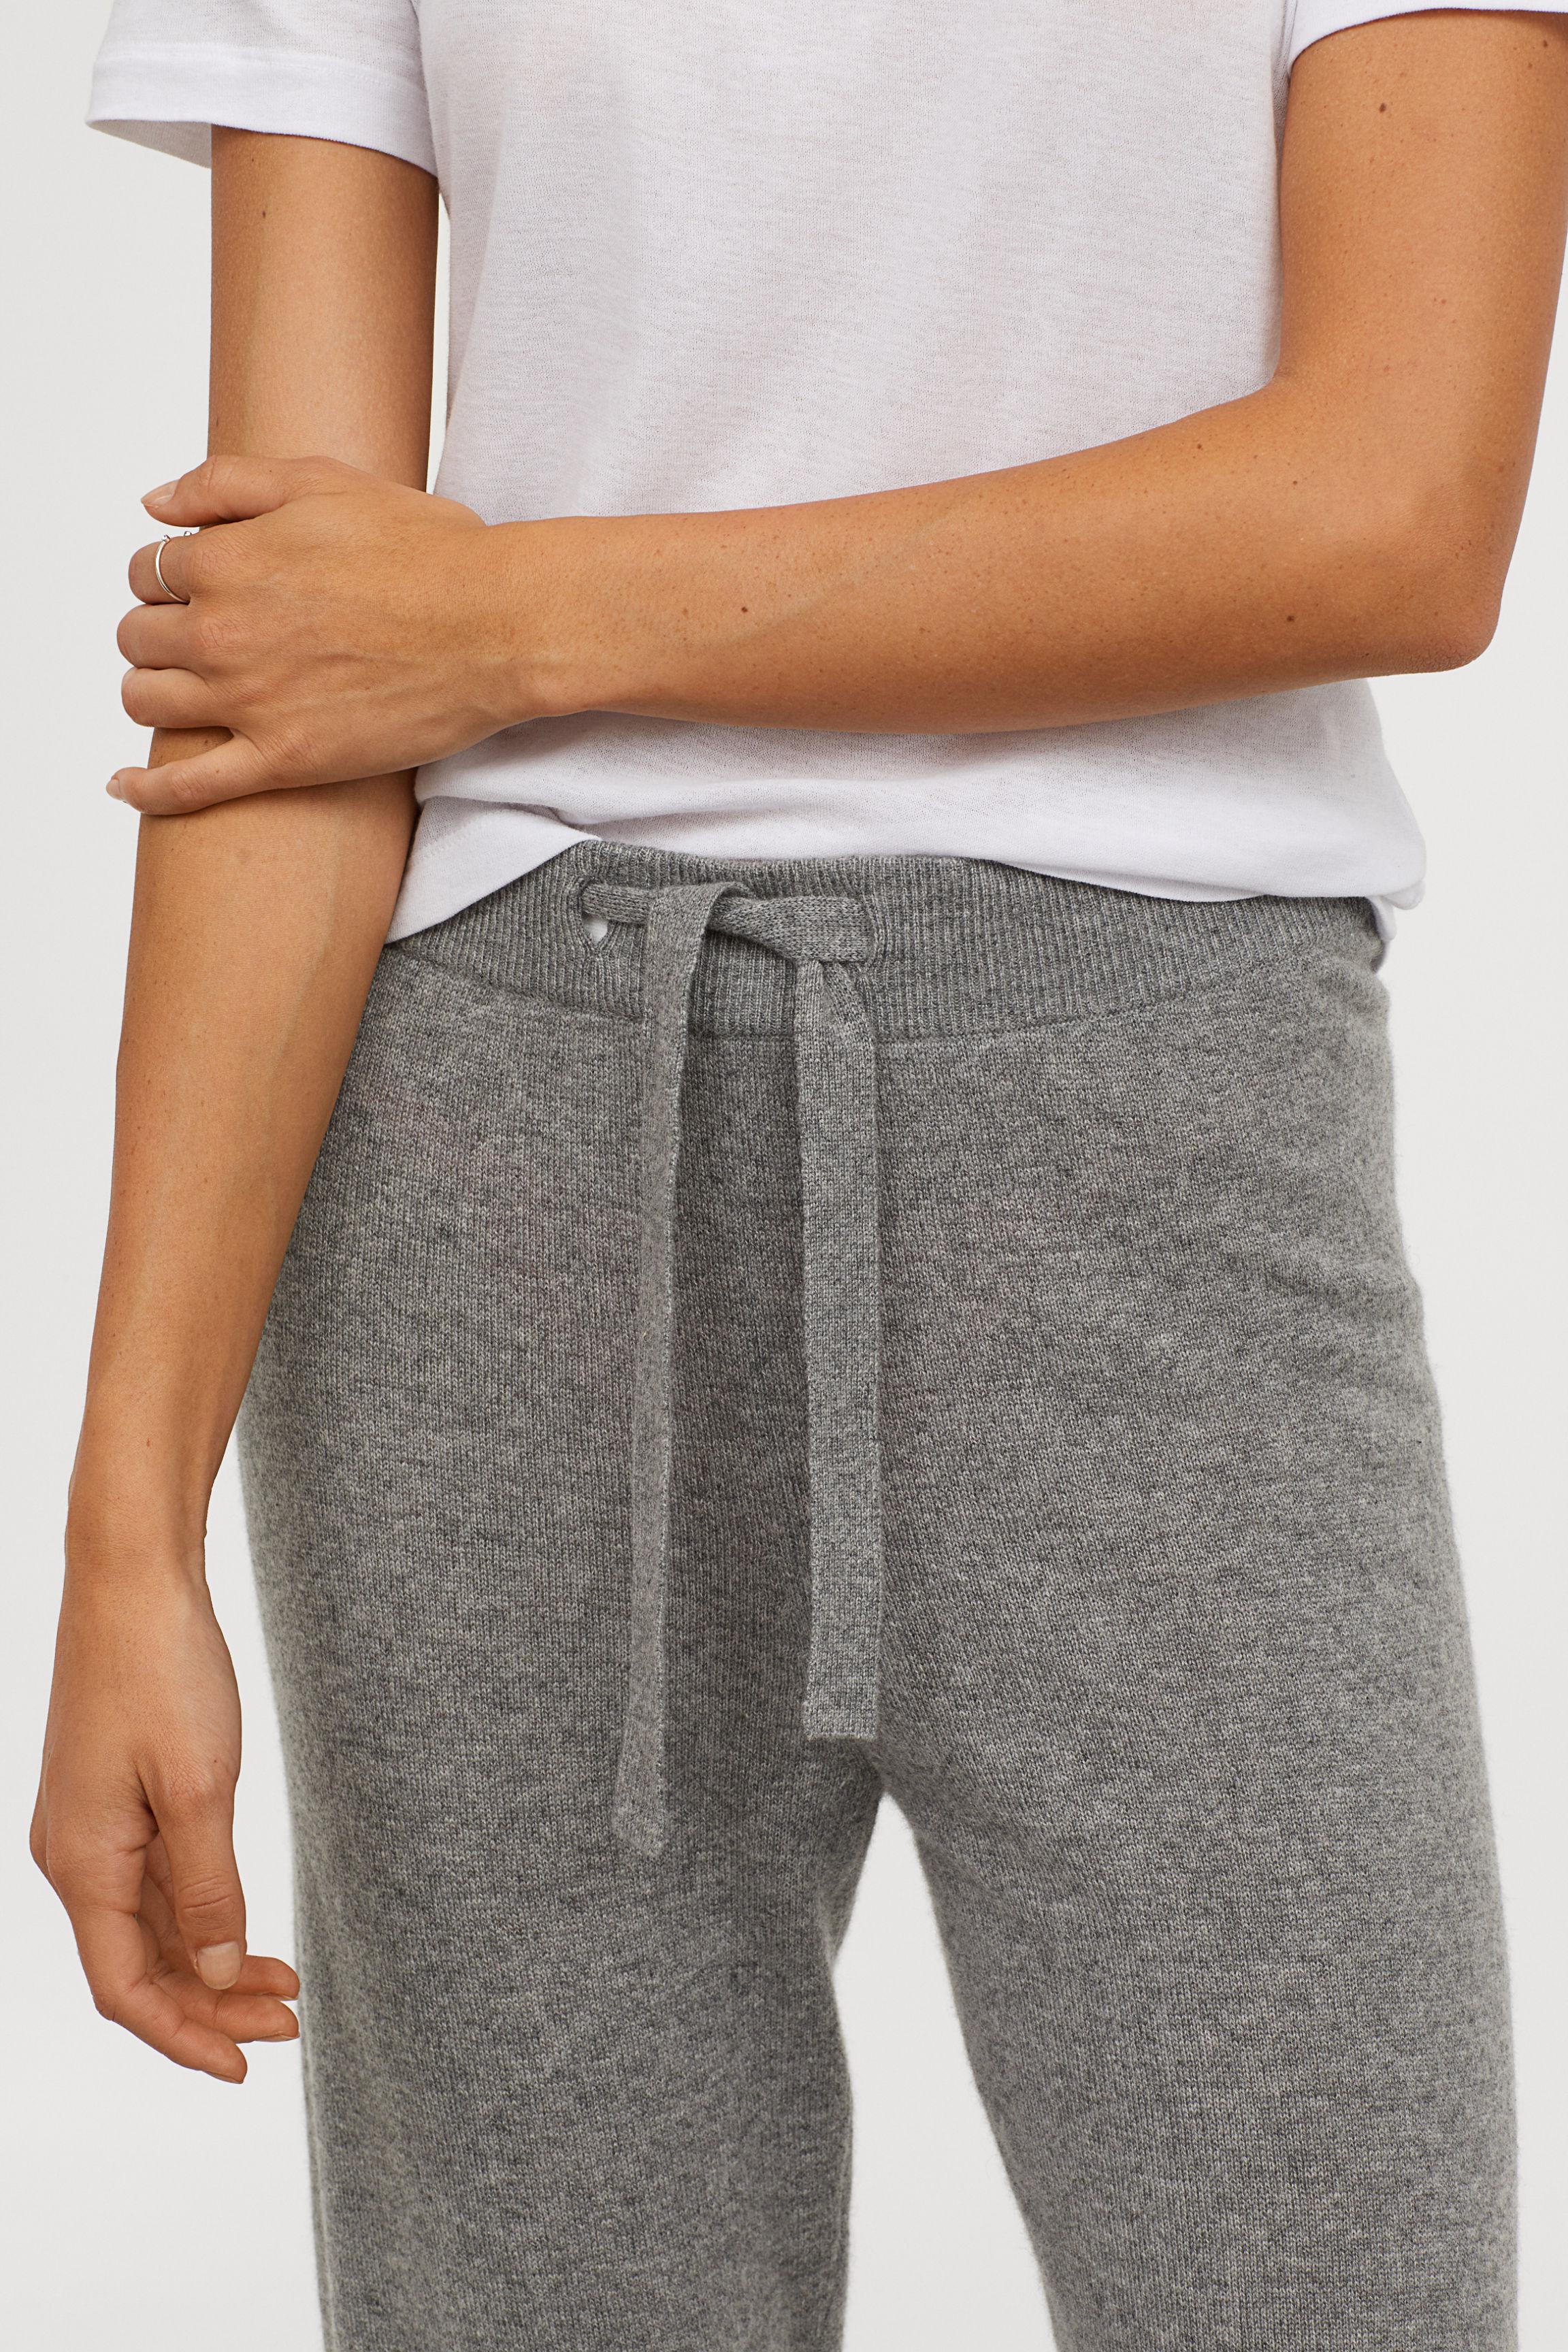 H&M Cashmere Joggers in Gray Melange (Gray) - Lyst